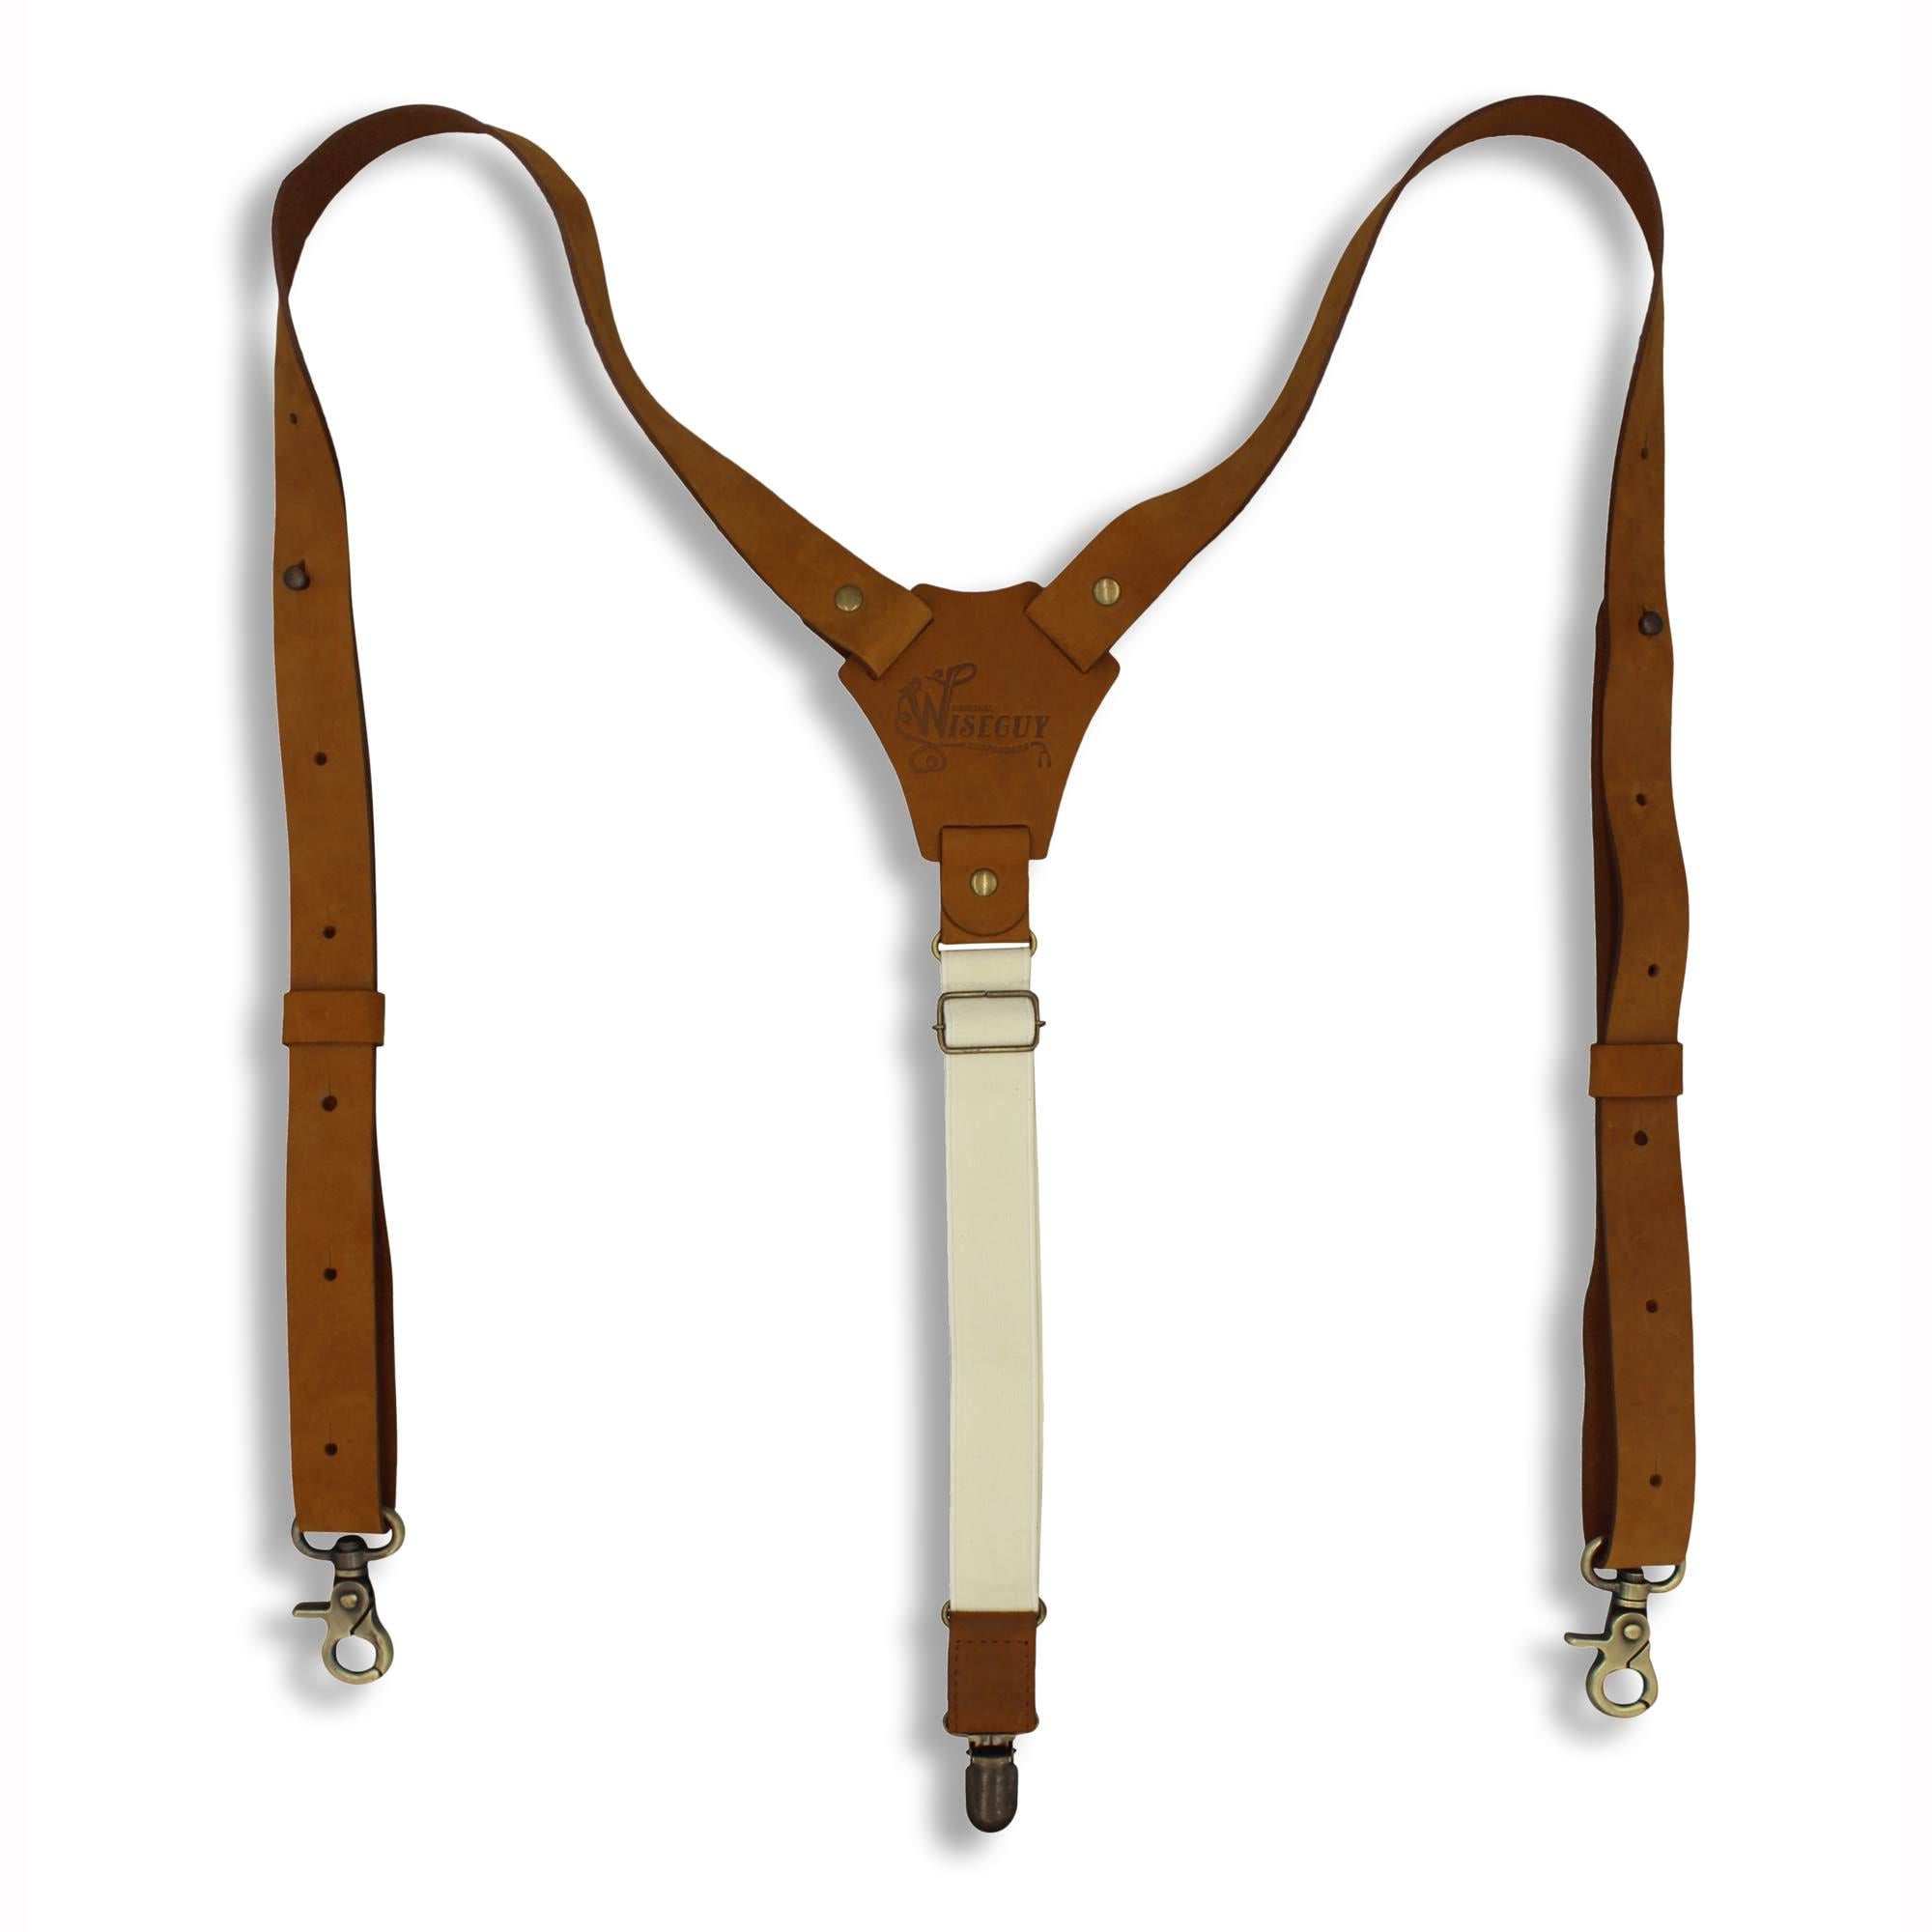 Flex Camel Brown Leather Braces with Elastic off-white Back Straps 1" - Wiseguy Suspenders